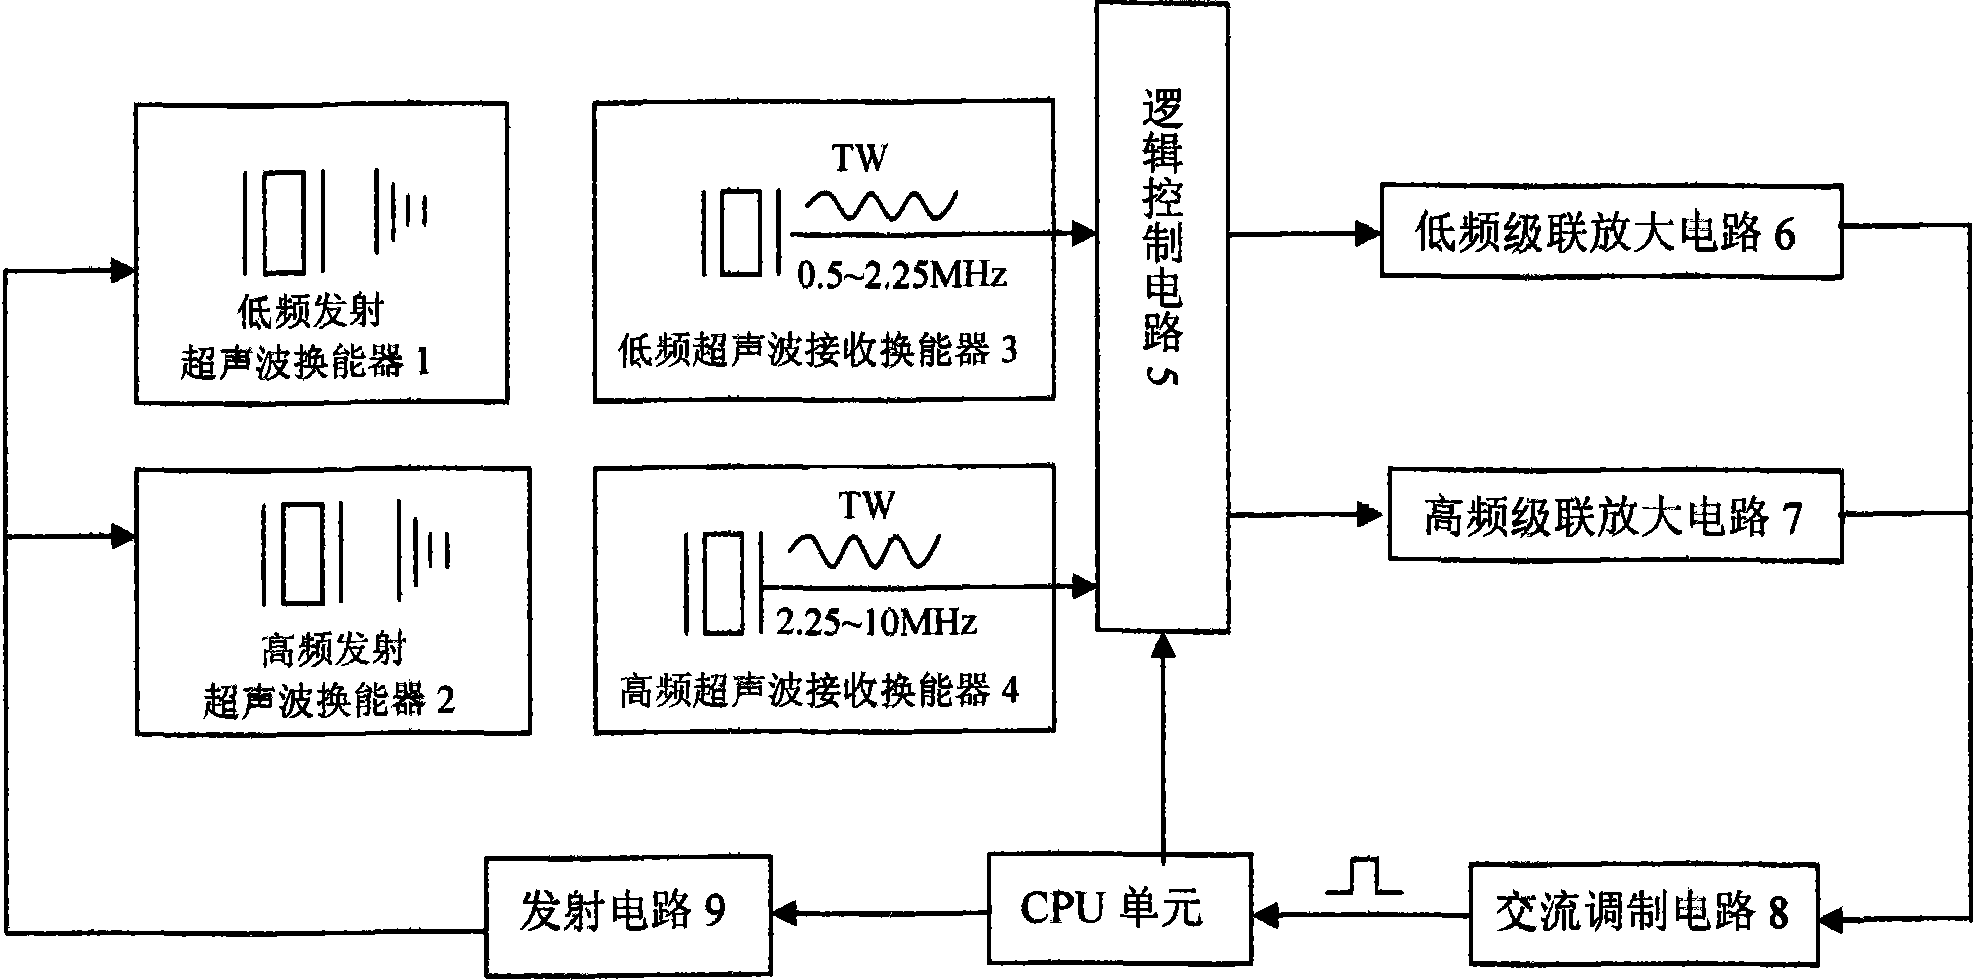 Dual-channel high-low-frequency ultrasonic attenuation signal detection device